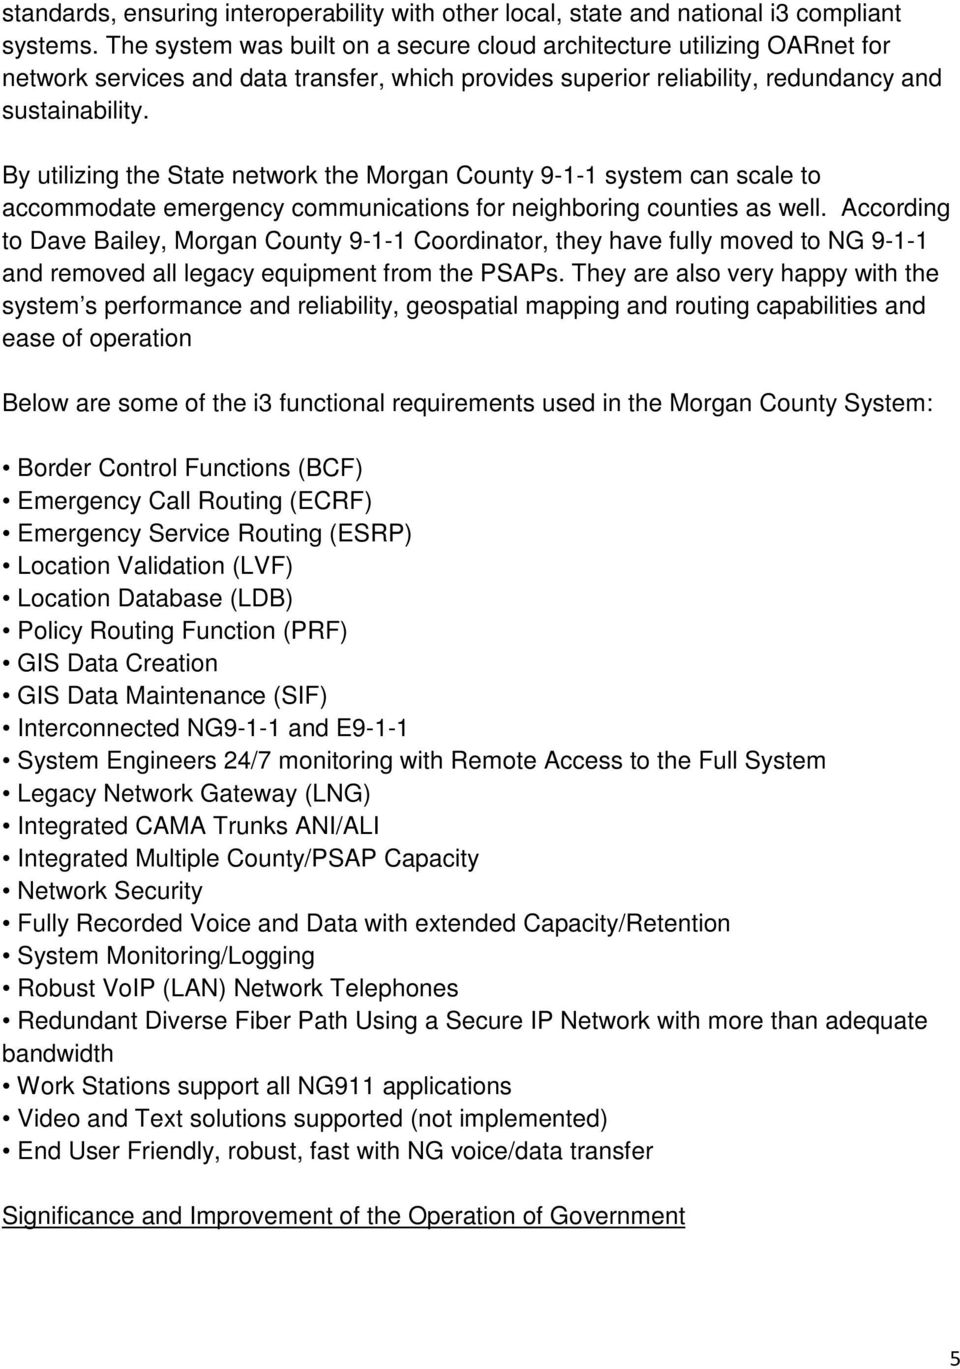 By utilizing the State network the Morgan County 9-1-1 system can scale to accommodate emergency communications for neighboring counties as well.